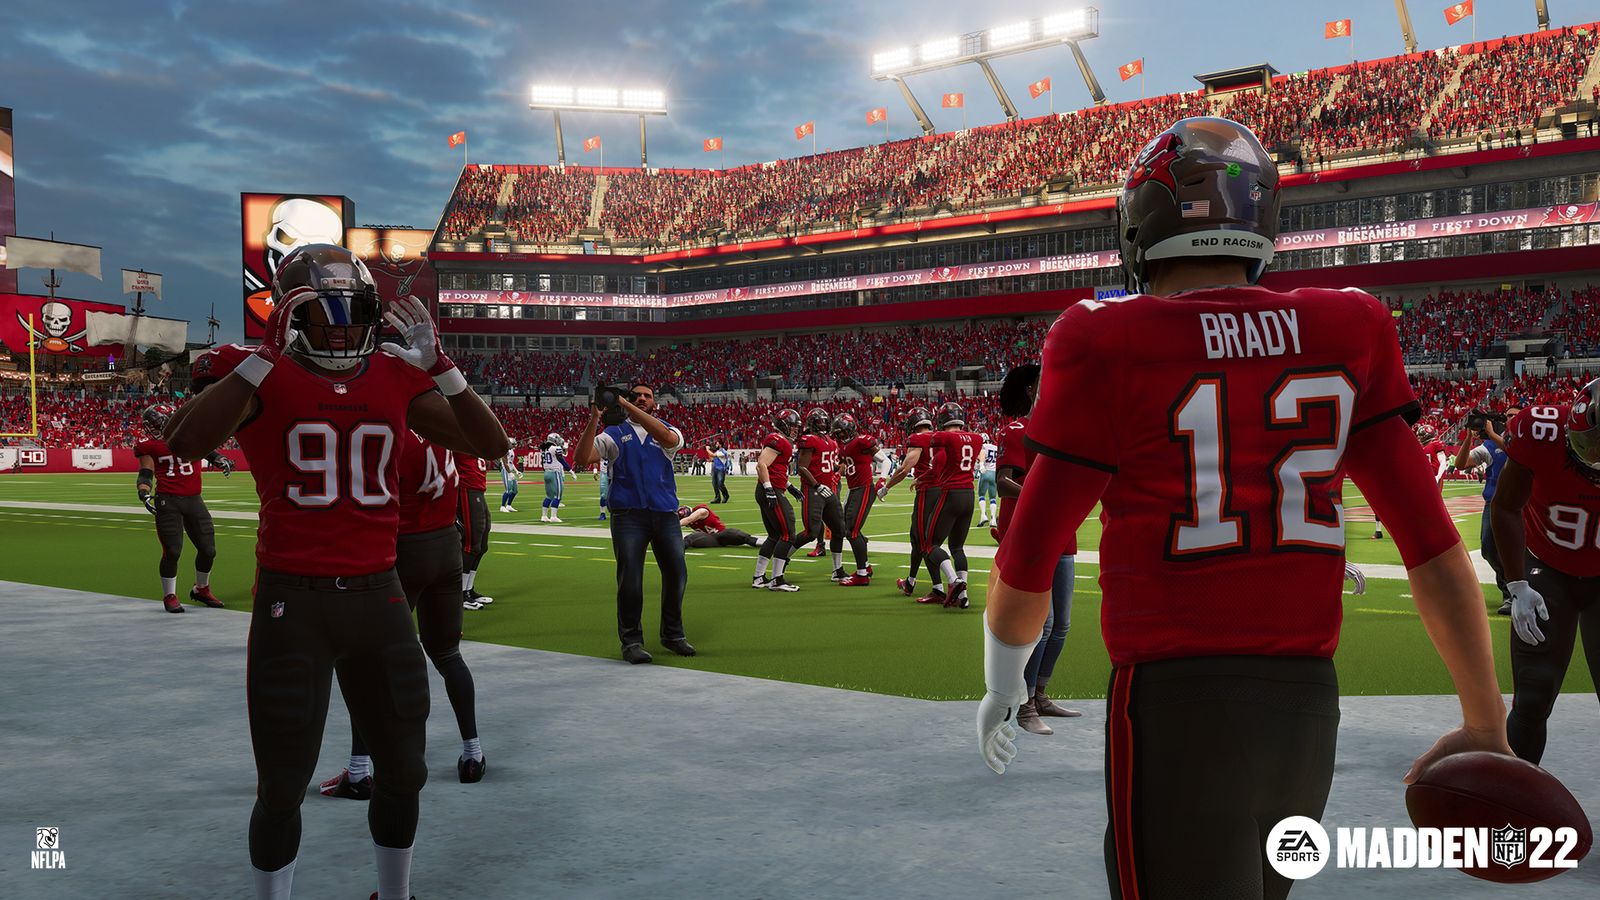 Madden 22 release date cover mahomes brady mvp edition gameplay trailer reveal